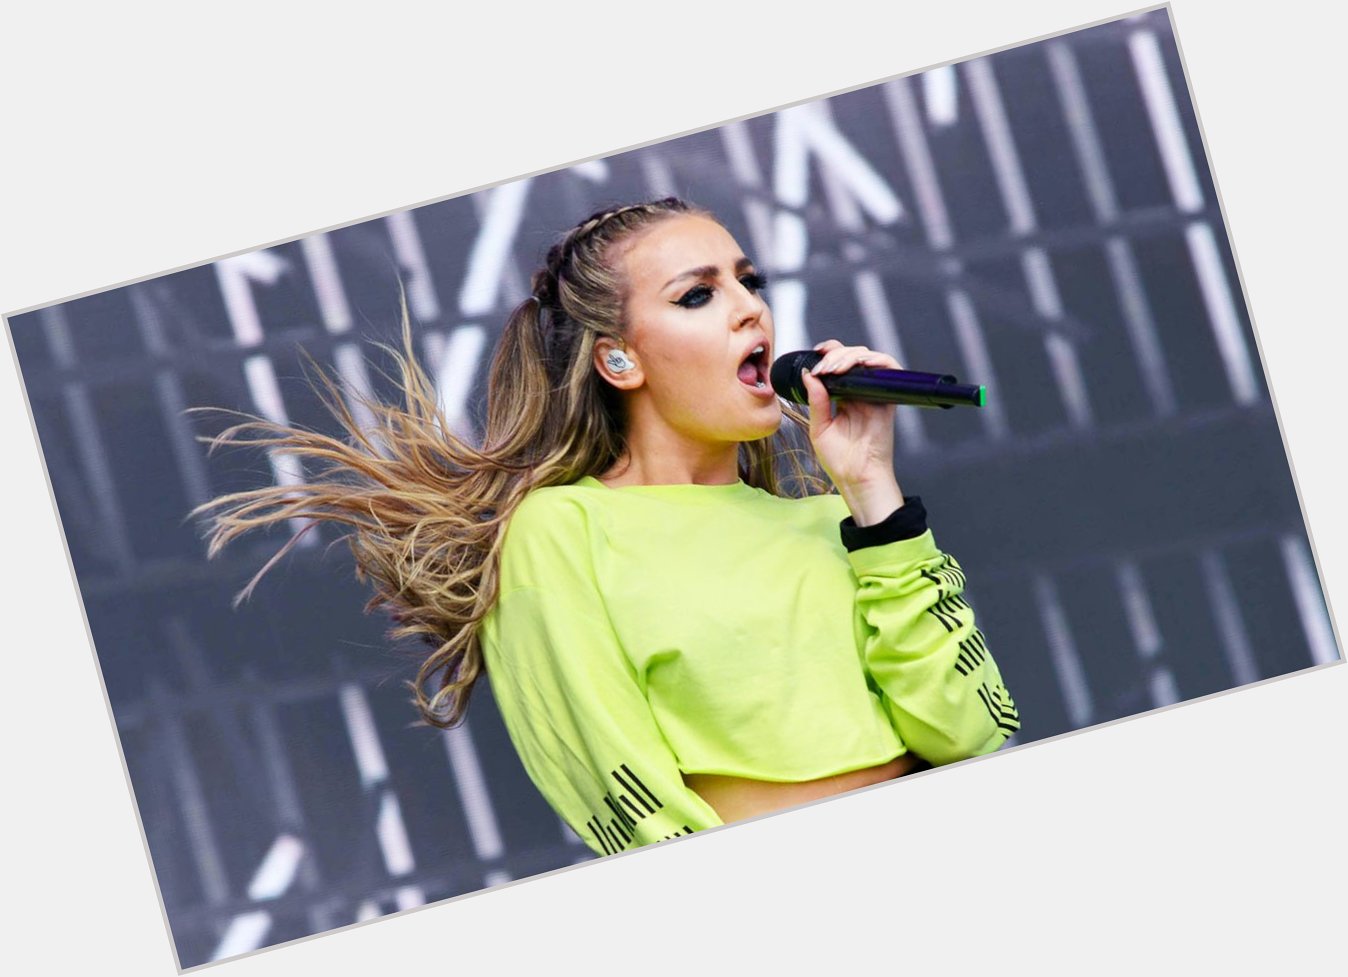 Happy Birthday Perrie Edwards! Which song makes you smile the most? 